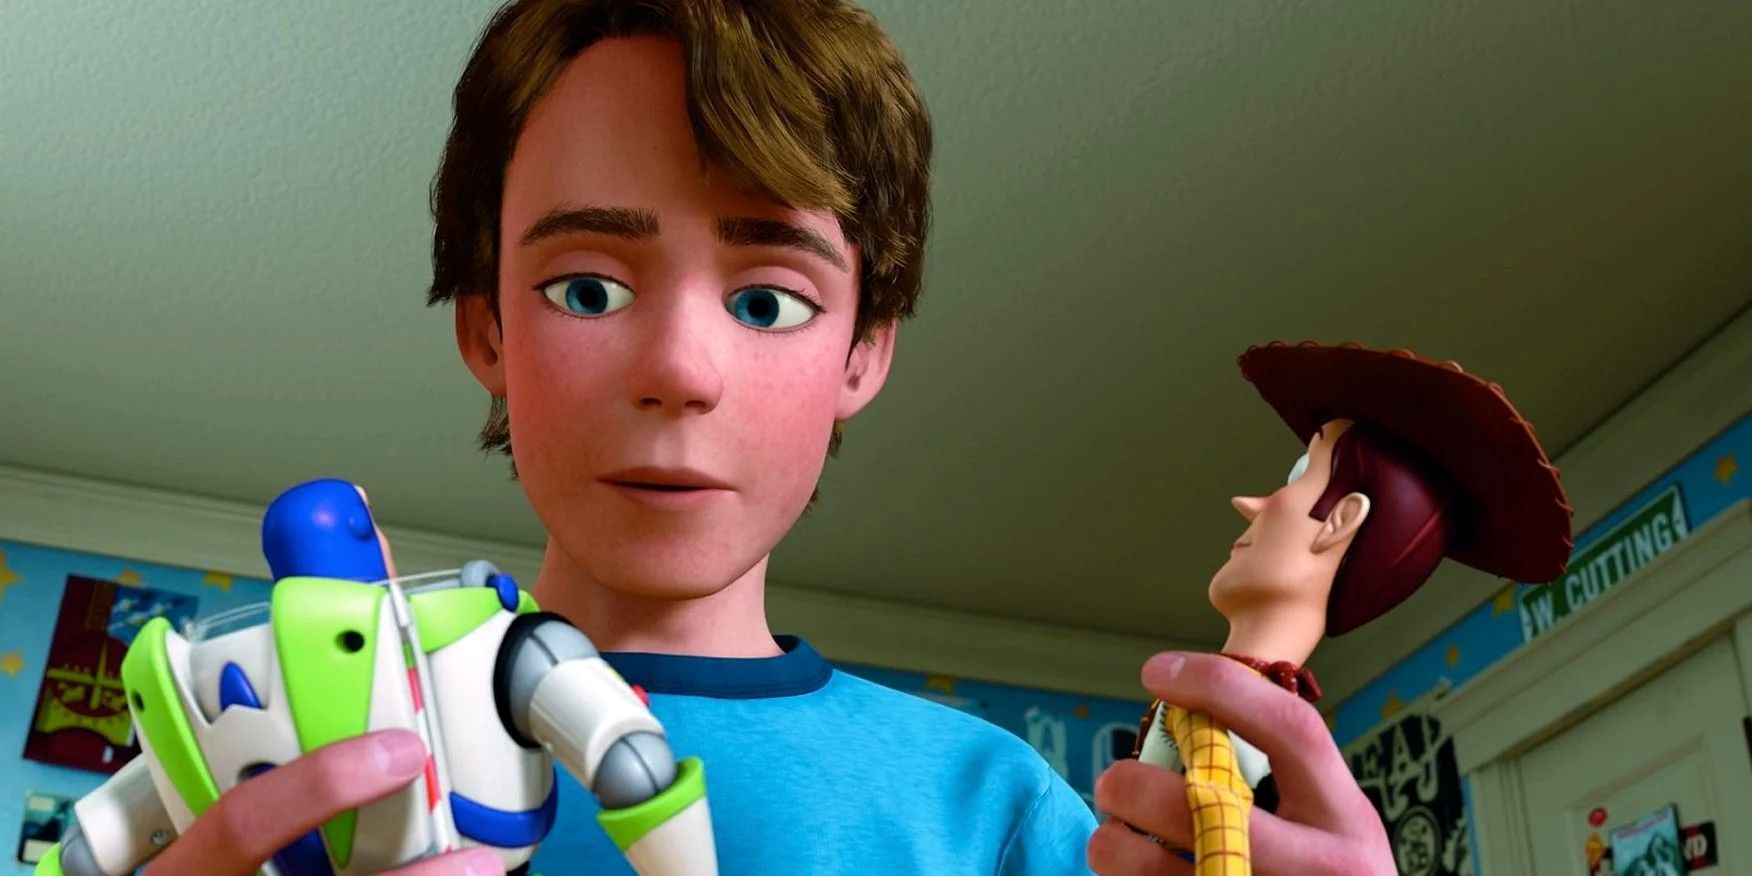 Andy with Buzz and Woody in Toy Story 3